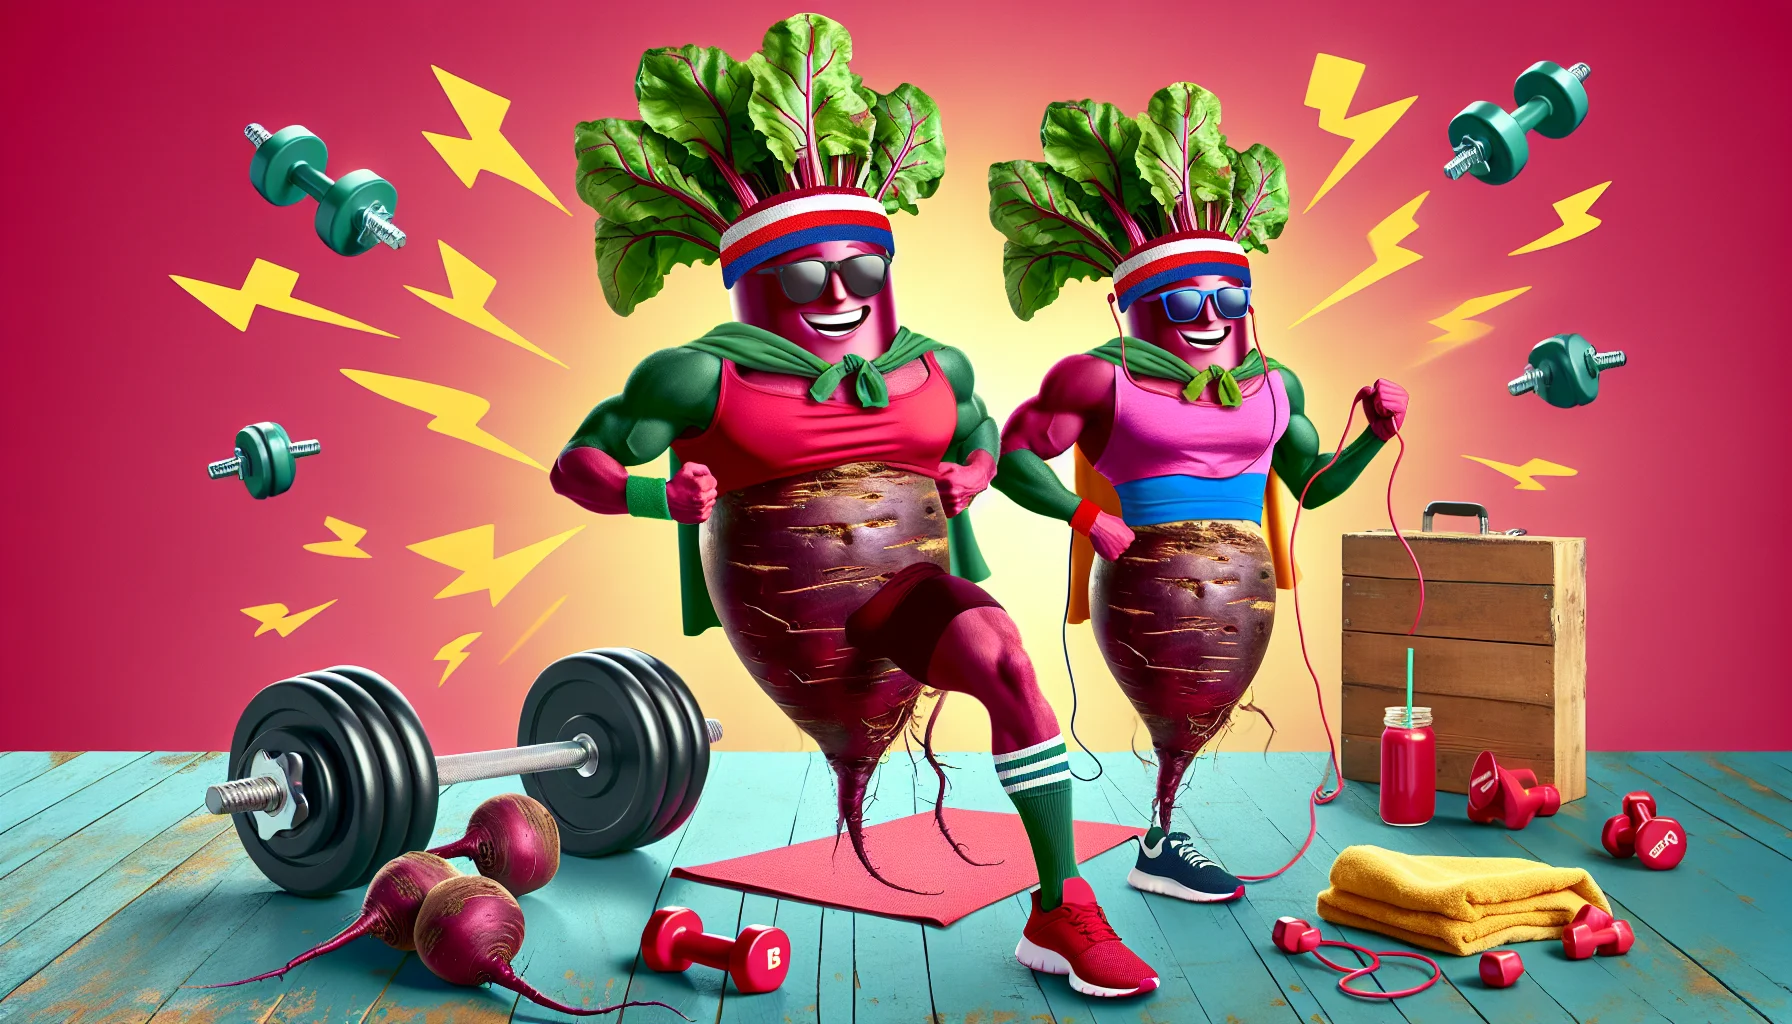 Envision a humorous scenario featuring the superfood that fitness enthusiasts rave about - Superbeets. Picture these beets wearing sporty bandanas and jogging shoes, filling weights, and doing cardio exercises with a vibrant, enlivening background. The atmosphere should radiate positivity and encouragement, with fun, comical elements thrown in to make people eager to participate in physical activities. This image serves the purpose of promoting both dietary health through Superbeets and the importance of regular exercise.